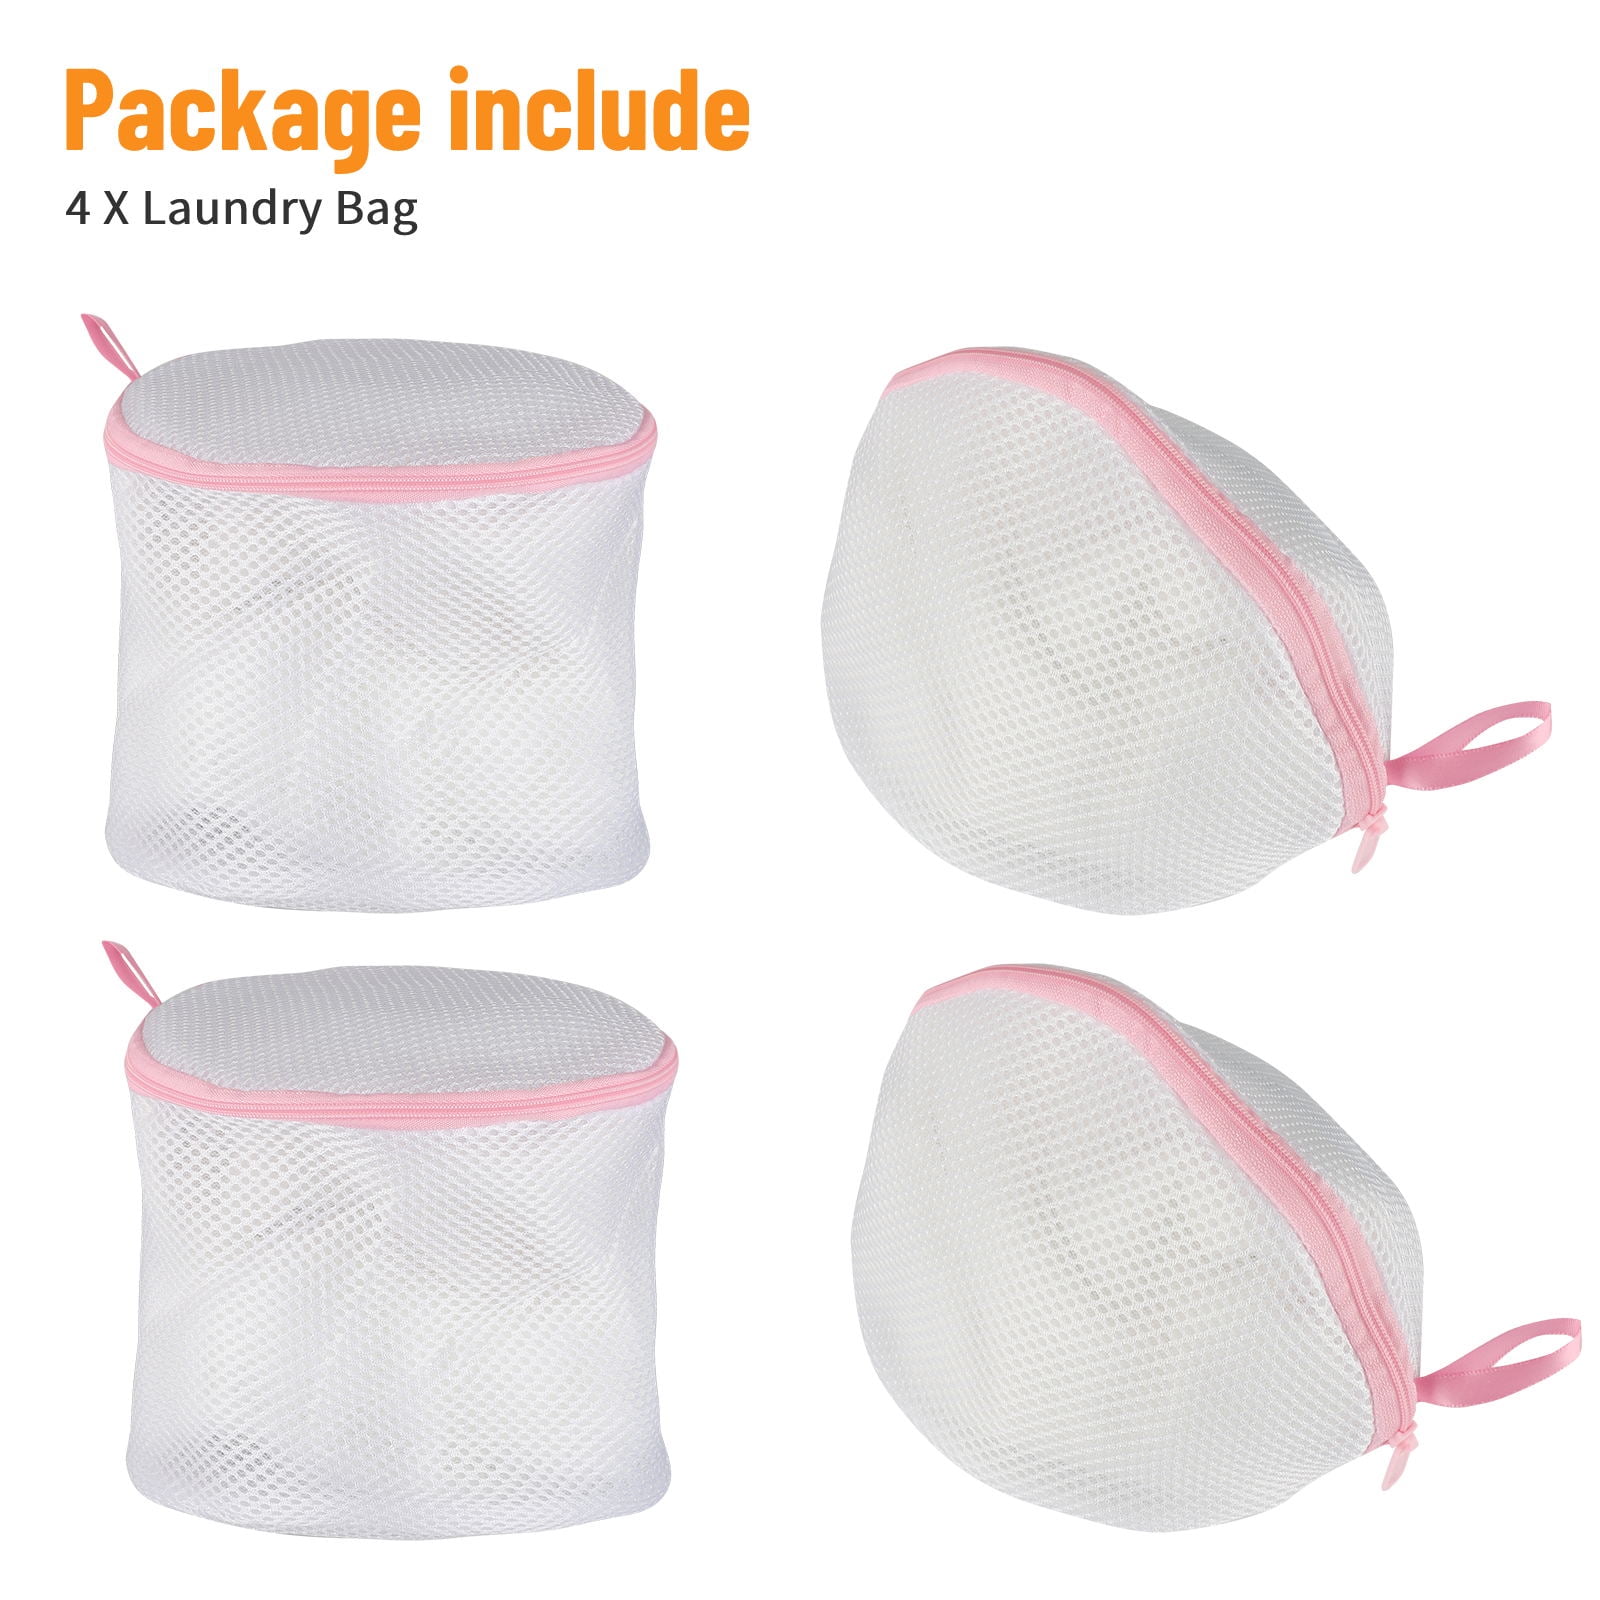 Mesh Laundry Washing Bag Lingerie Washing Bag - CPAC0147SG - IdeaStage  Promotional Products